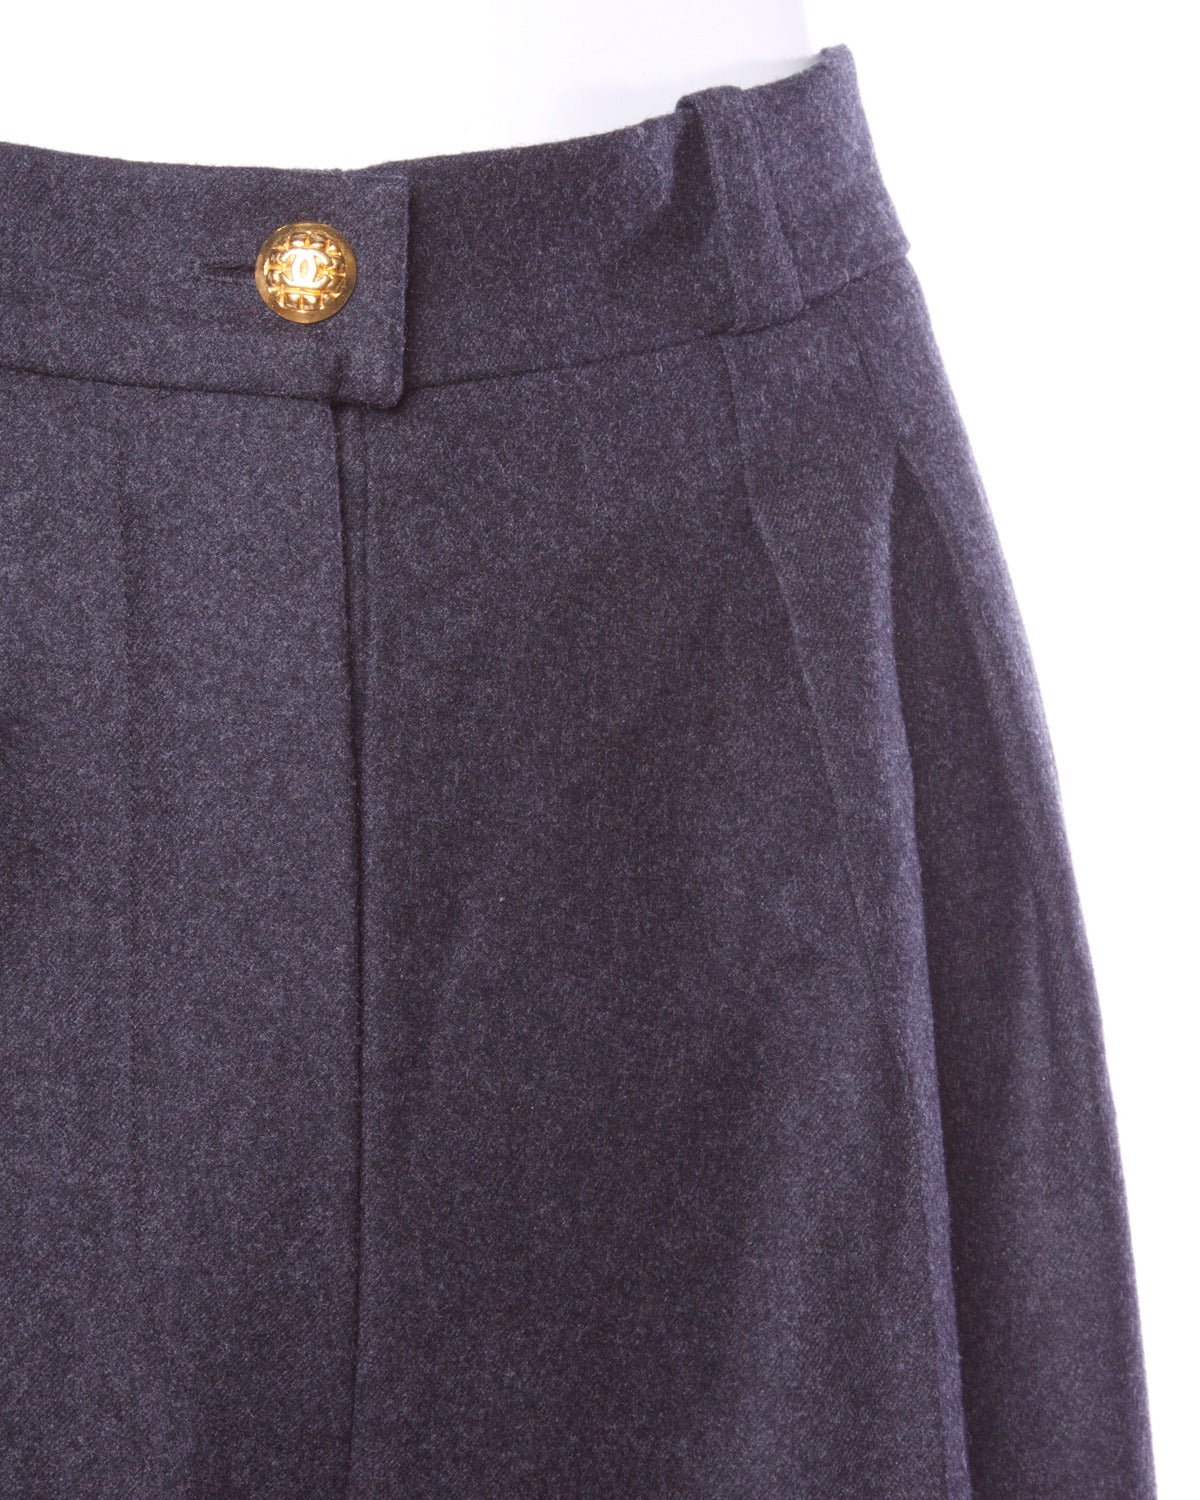 Stunning vintage Chanel soft gray wool high waisted trousers with gold tone CC logo buttons. Well tailored, simple and elegant.

Details:

Fully Lined
Back Pockets
Front Button and Hook Closure
Marked Size: 36
Color: Charcoal Gray
Fabric: